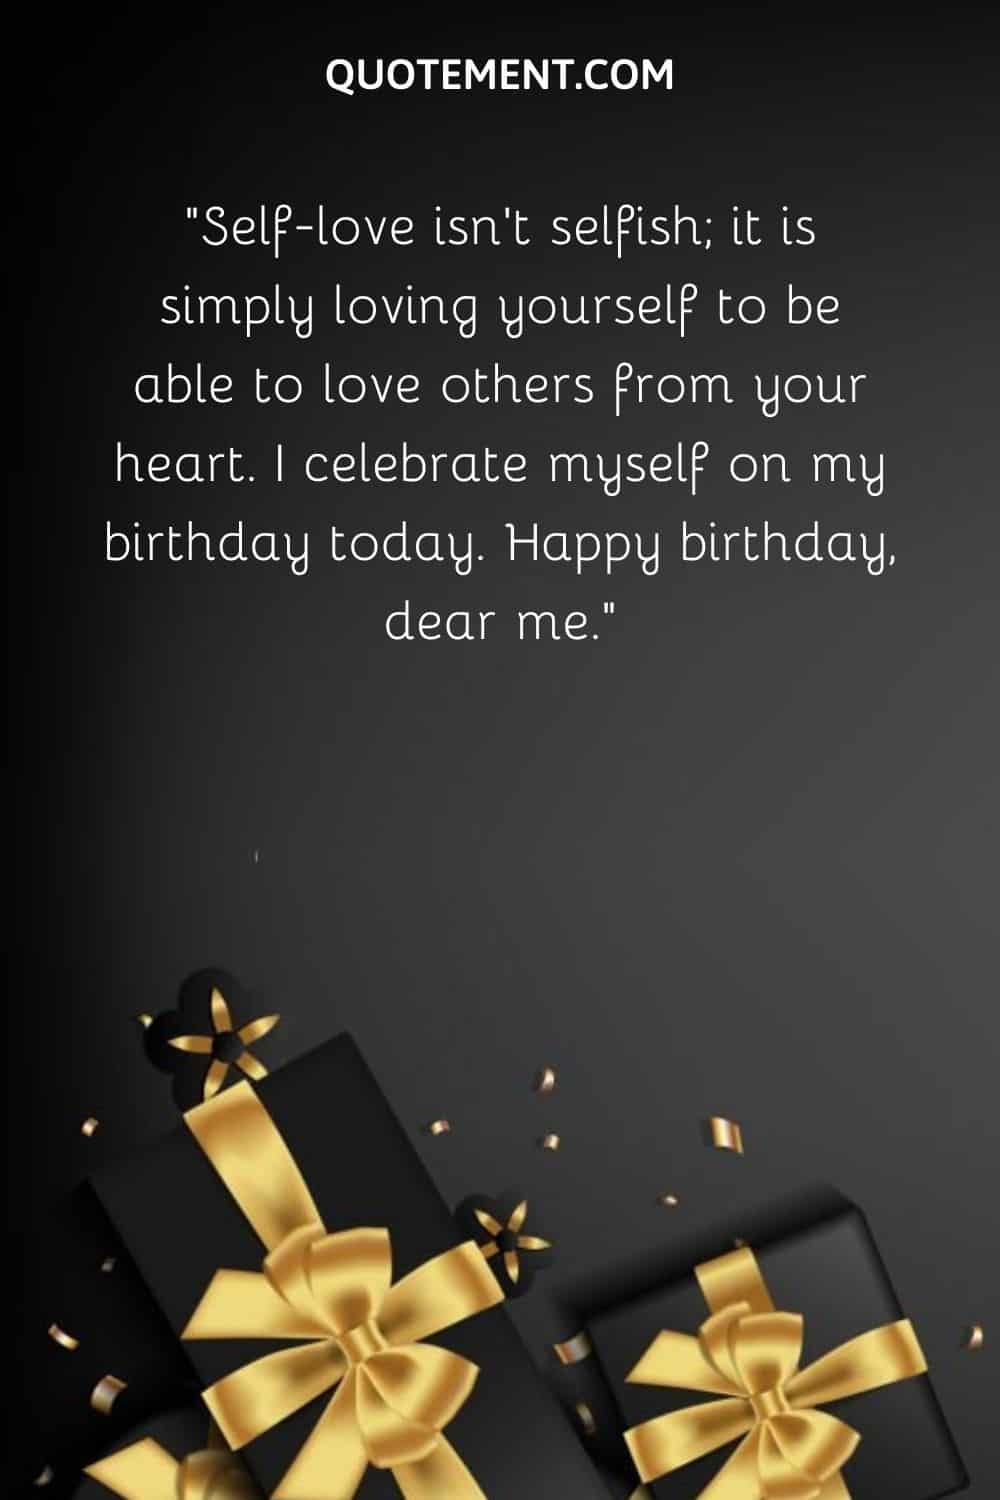 “Self-love isn’t selfish; it is simply loving yourself to be able to love others from your heart. I celebrate myself on my birthday today. Happy birthday, dear me.”